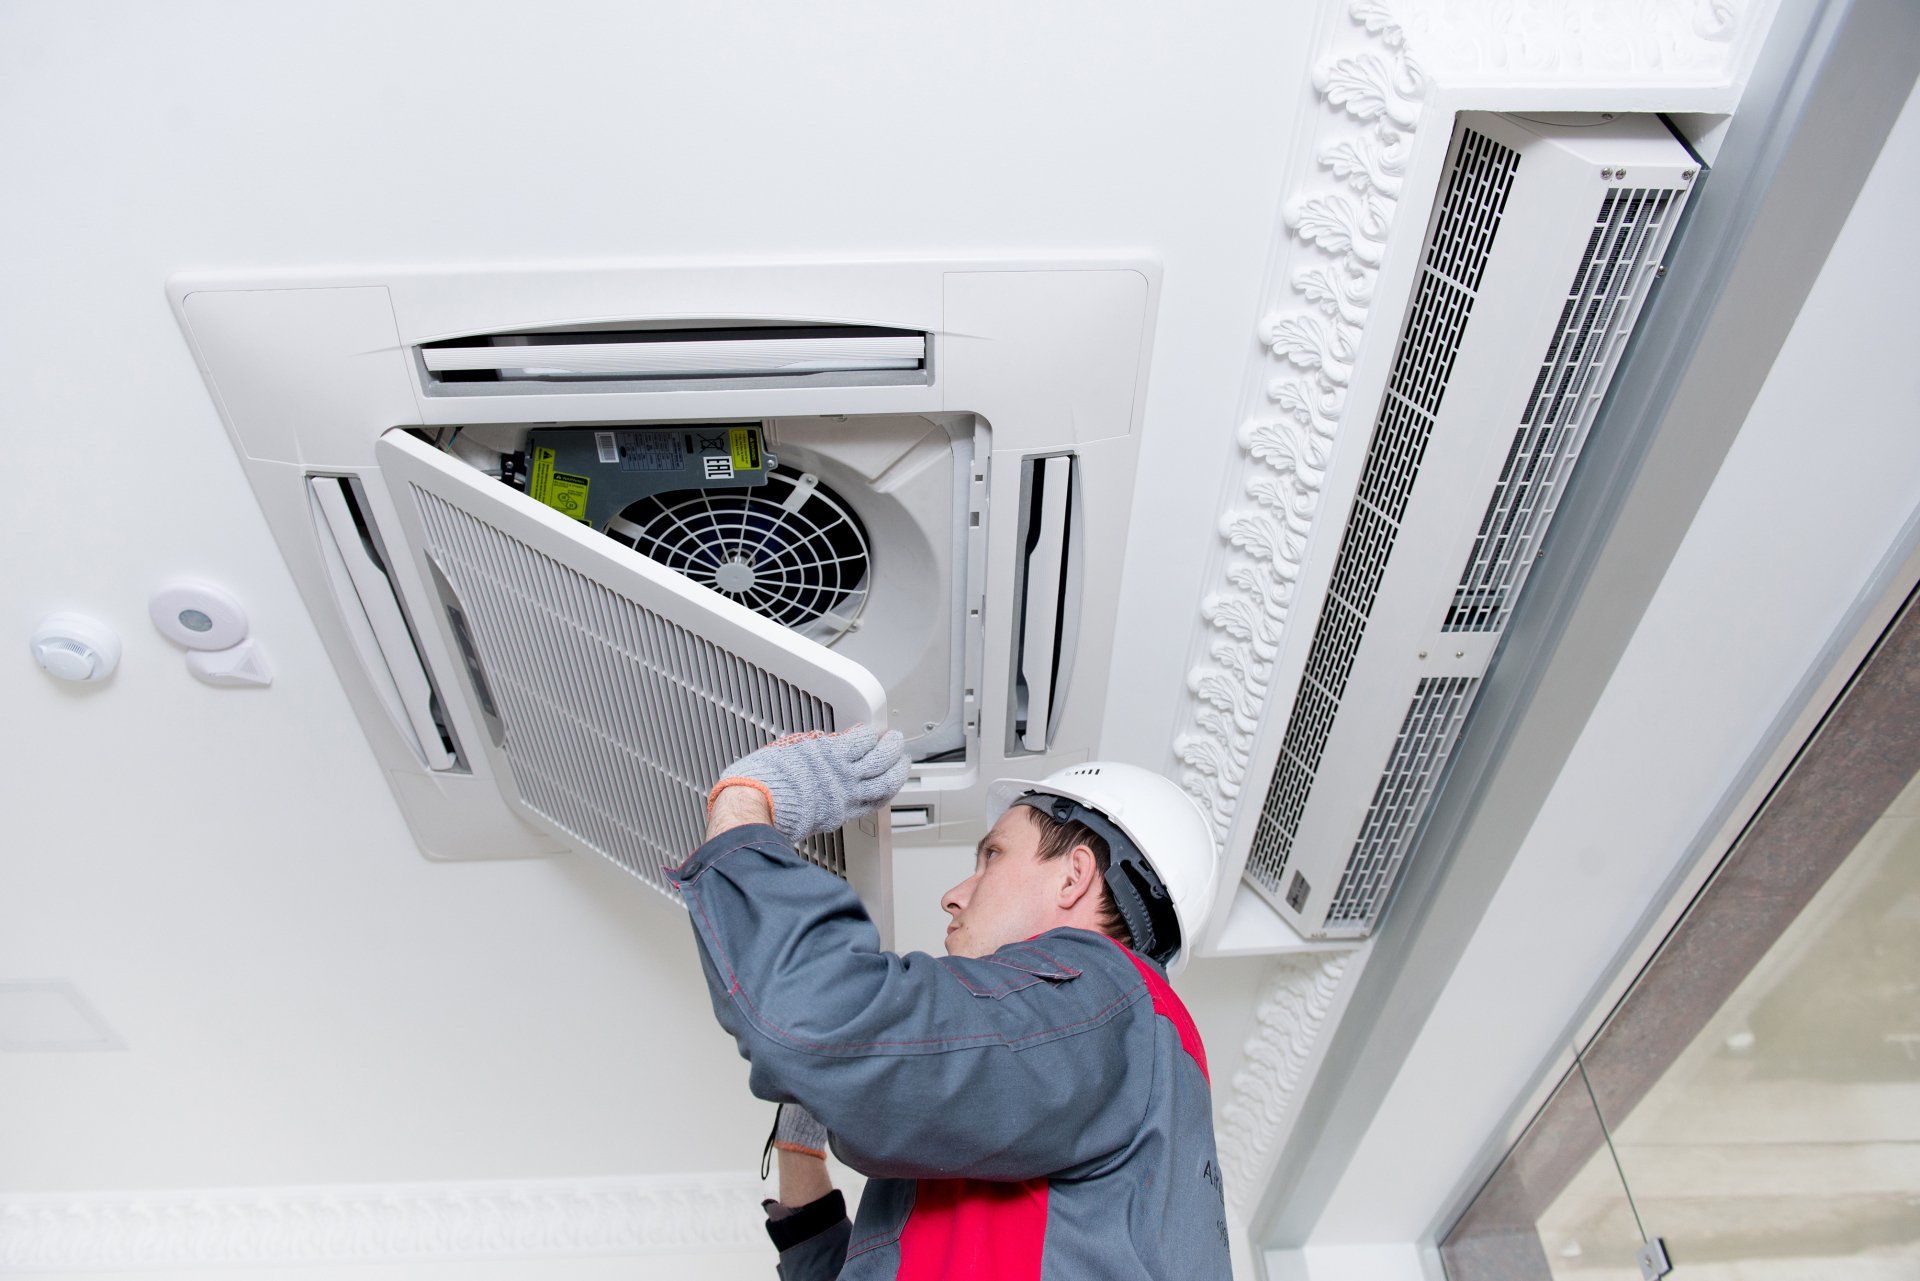 Specialist Cleans And Repairs The Wall Air Conditioner - Air Conditioning Services in Mackay, QLD